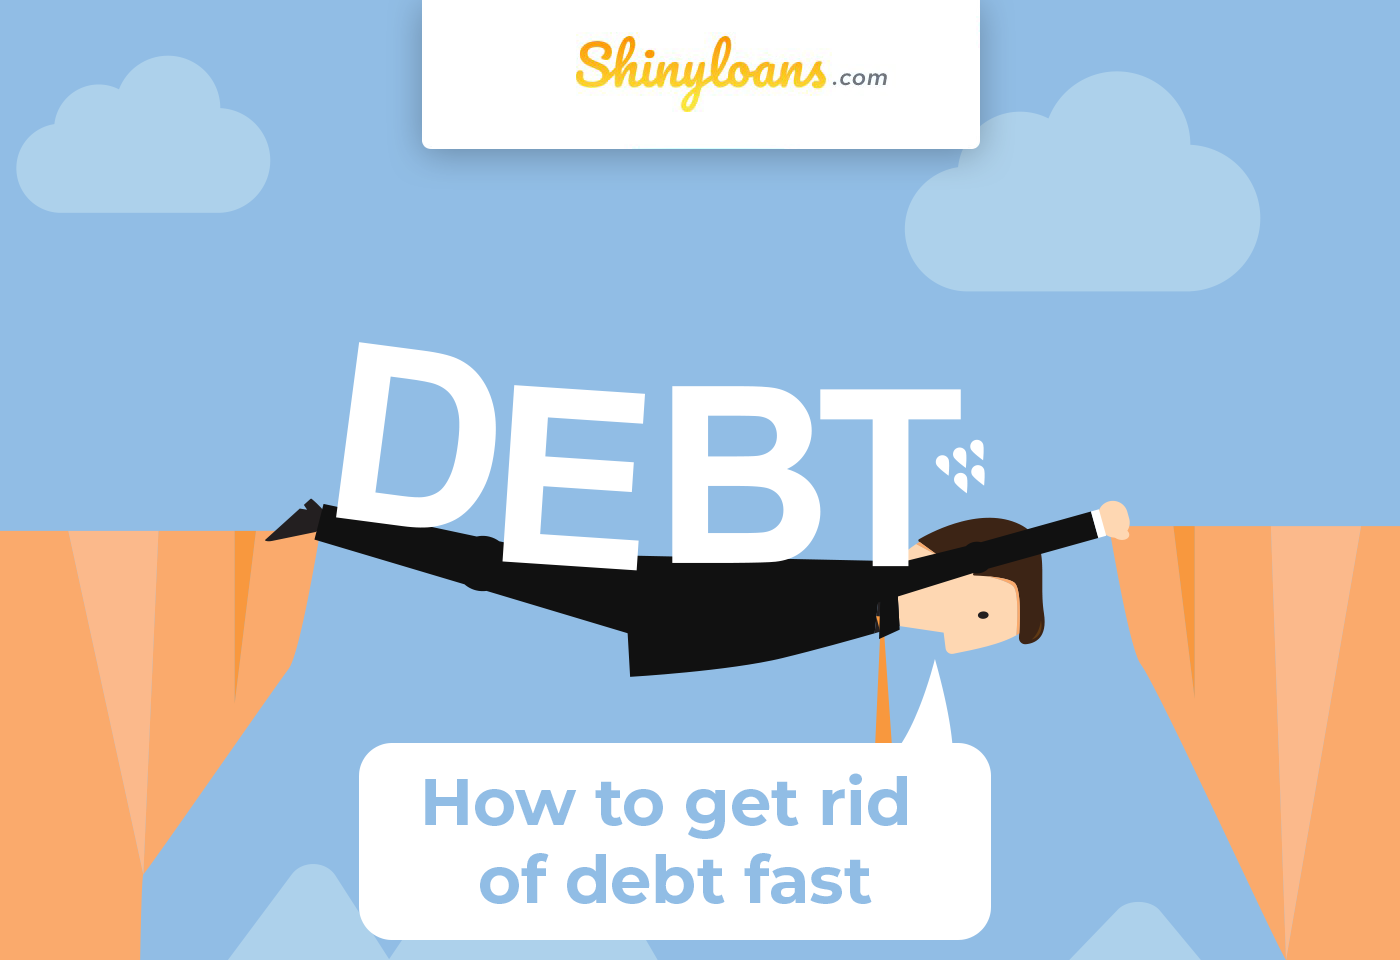 How to Get Rid of Debt Fast